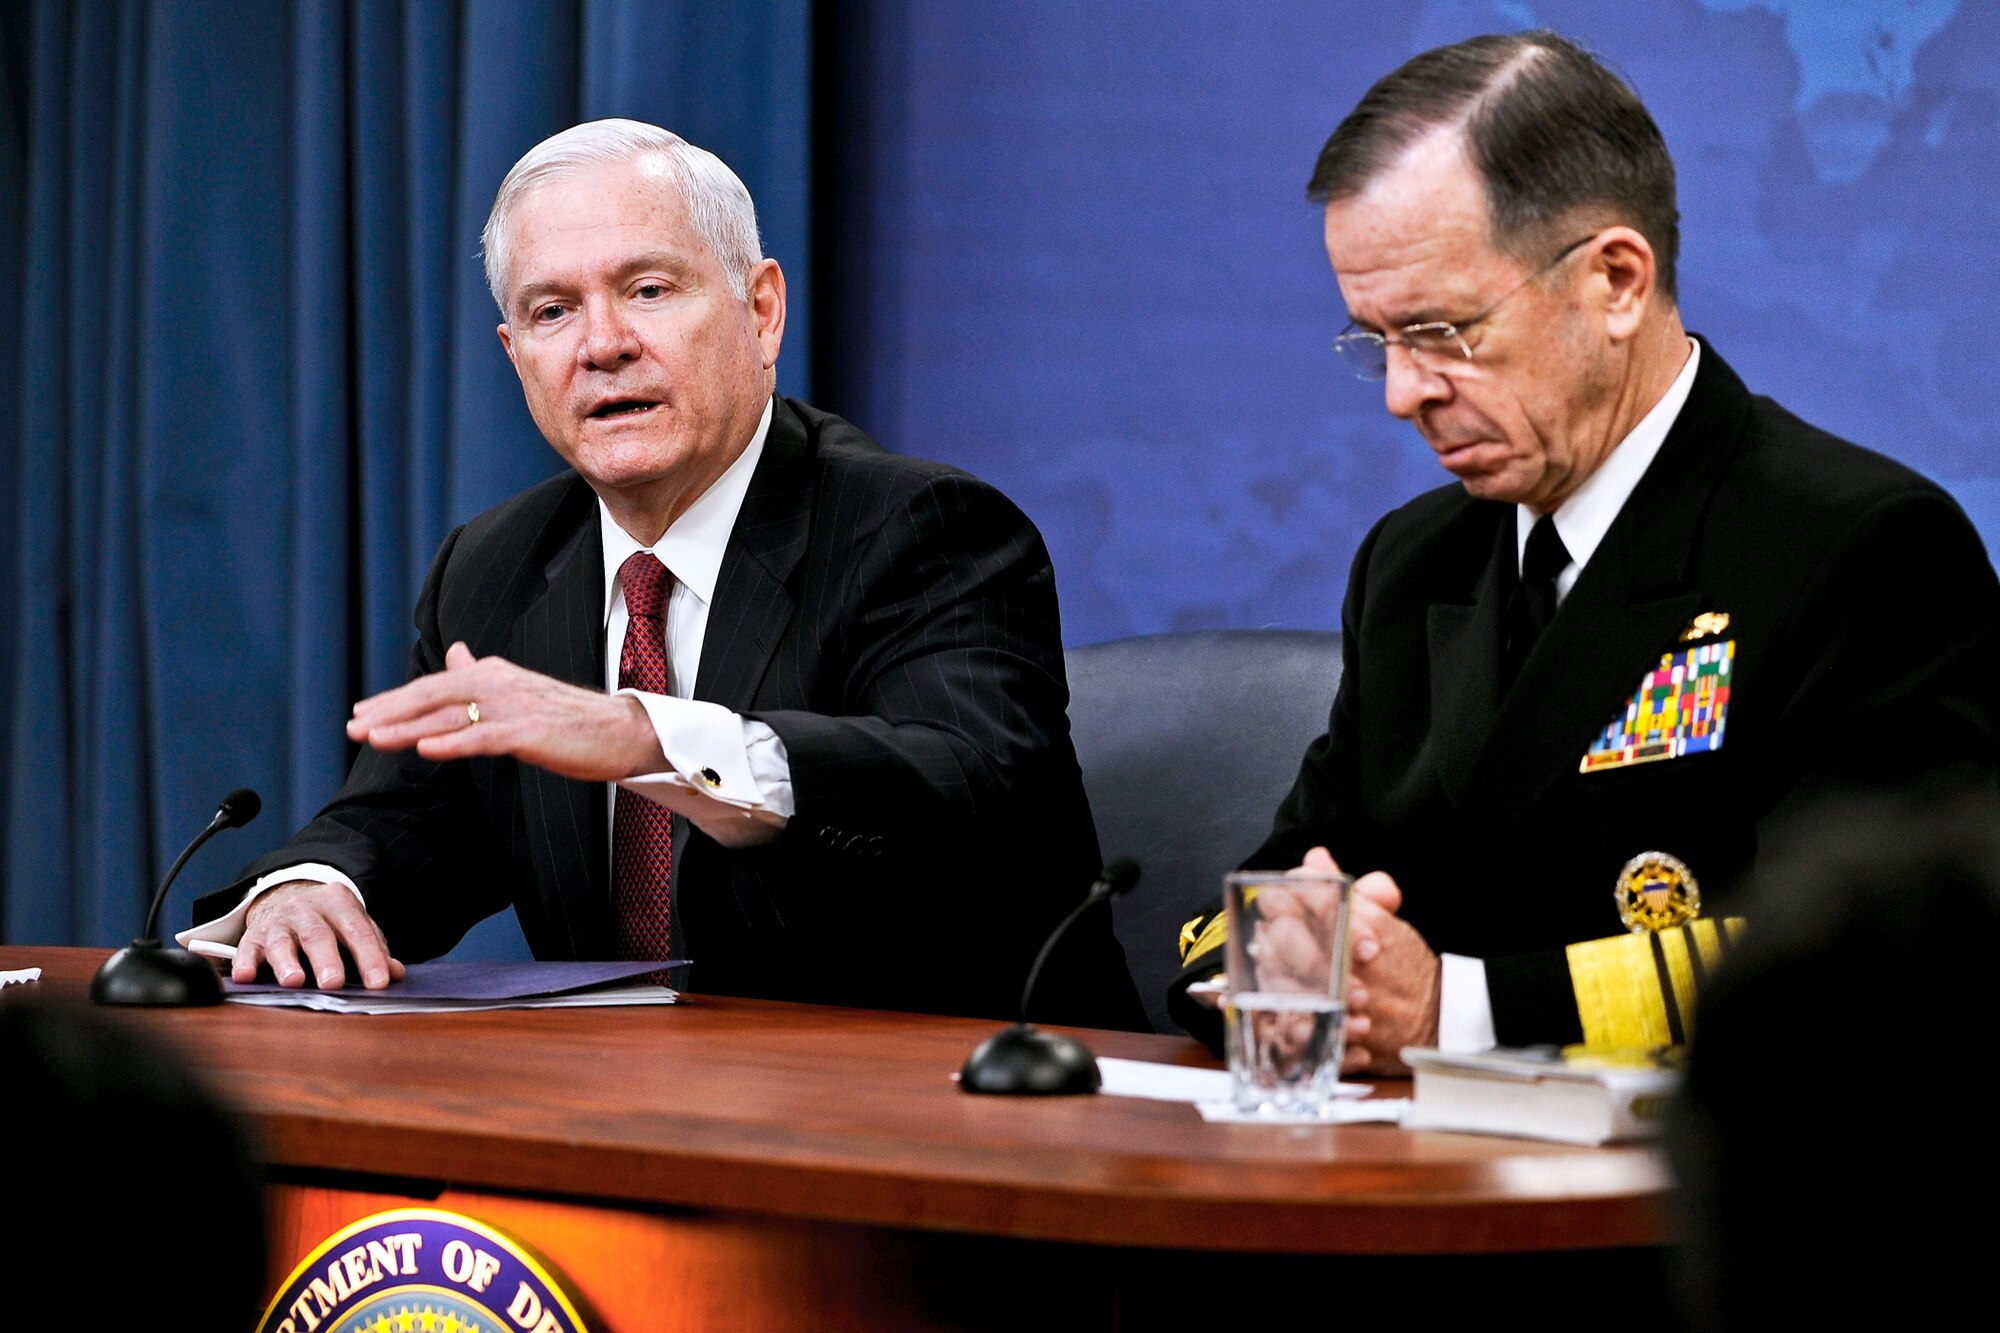 Defense Secretary Robert M. Gates makes a point during a Jan. 6, 2011, Pentagon news conference with Navy Adm. Mike Mullen, the chairman of the Joint Chiefs of Staff. (DOD photo/Air Force Master Sgt. Jerry Morrison)